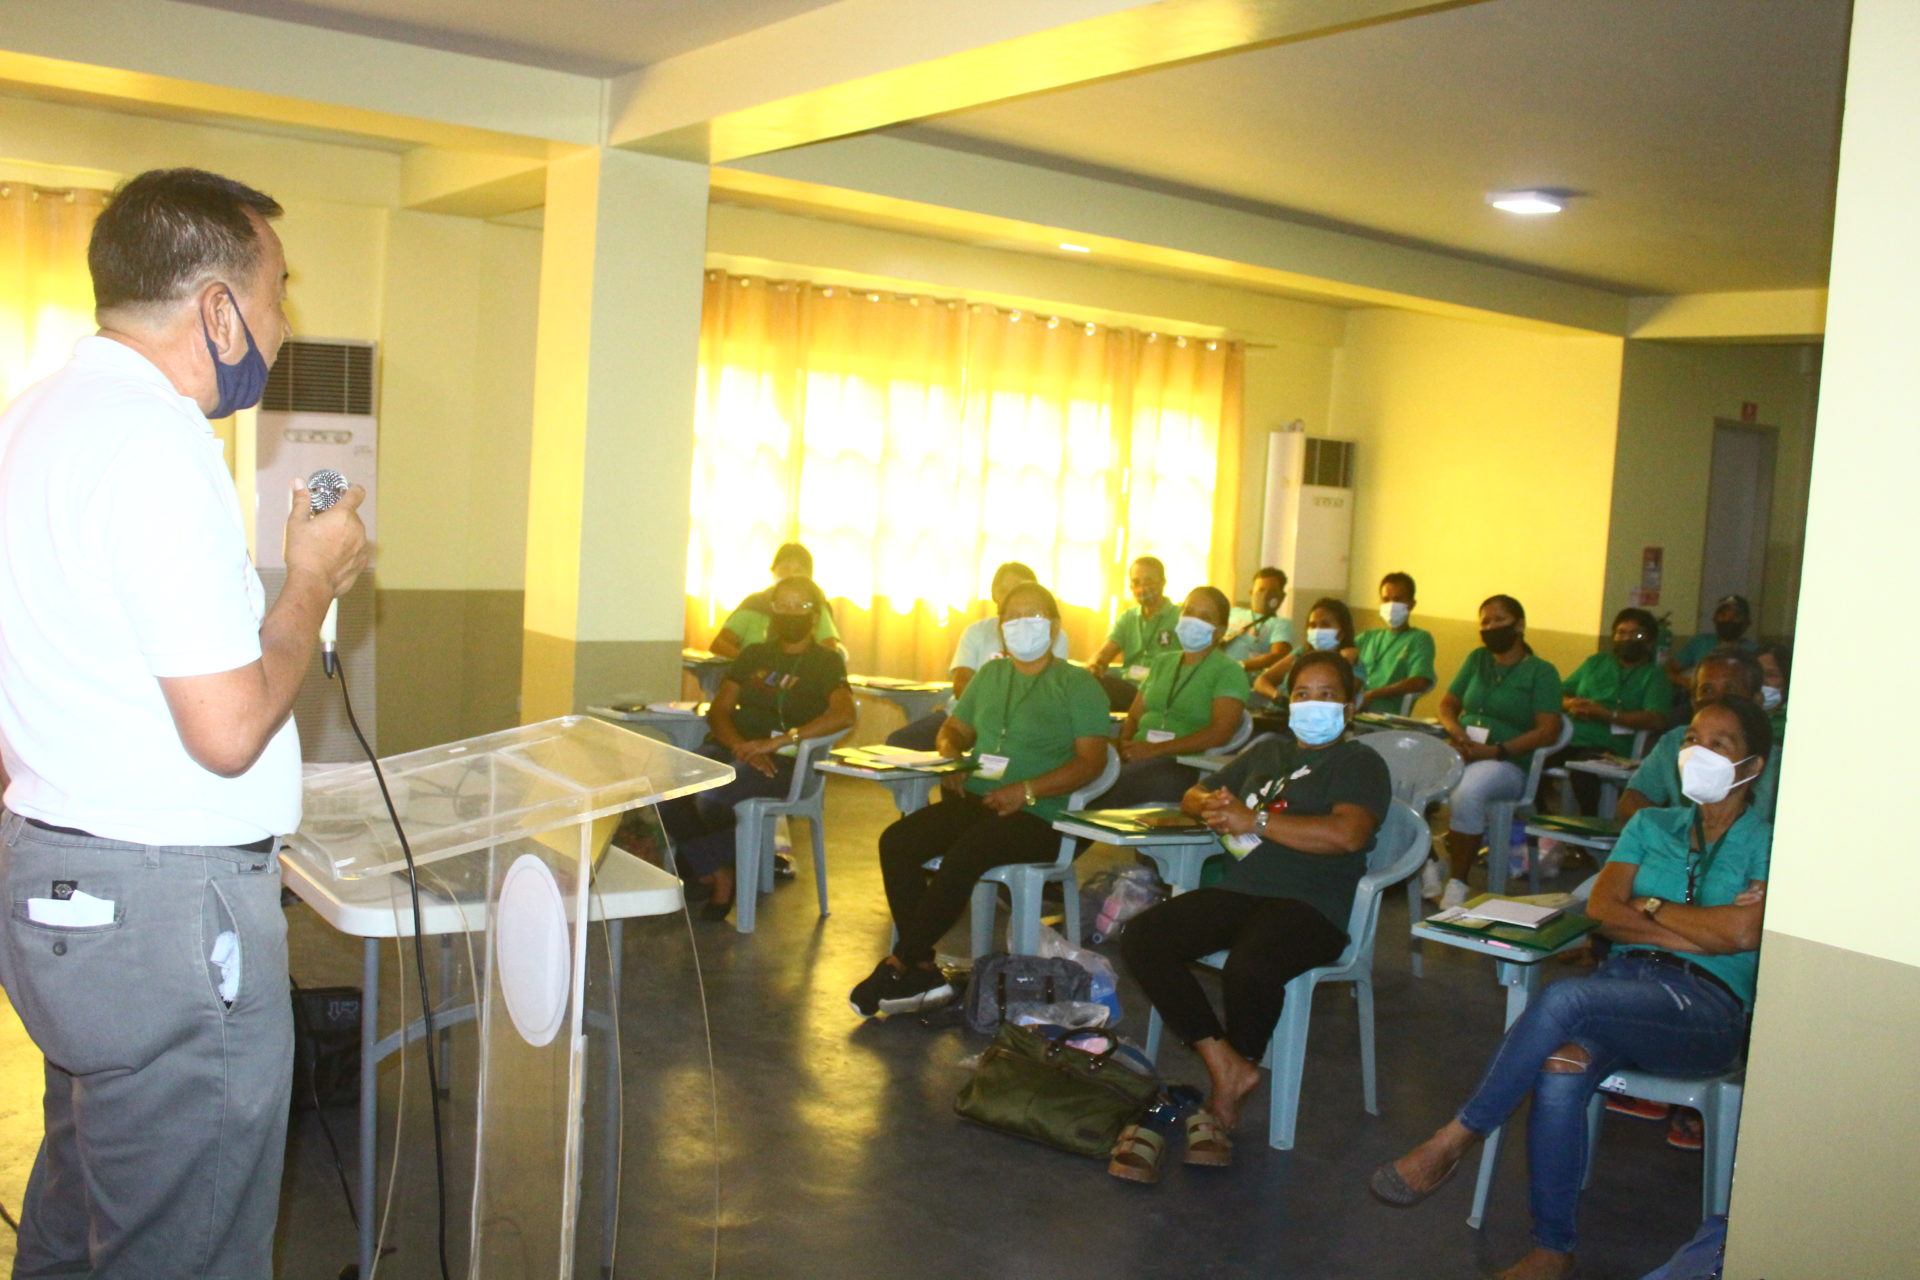 DA RFO 5 conducts Training on Corn Production to SAAD Beneficiaries of Pilar